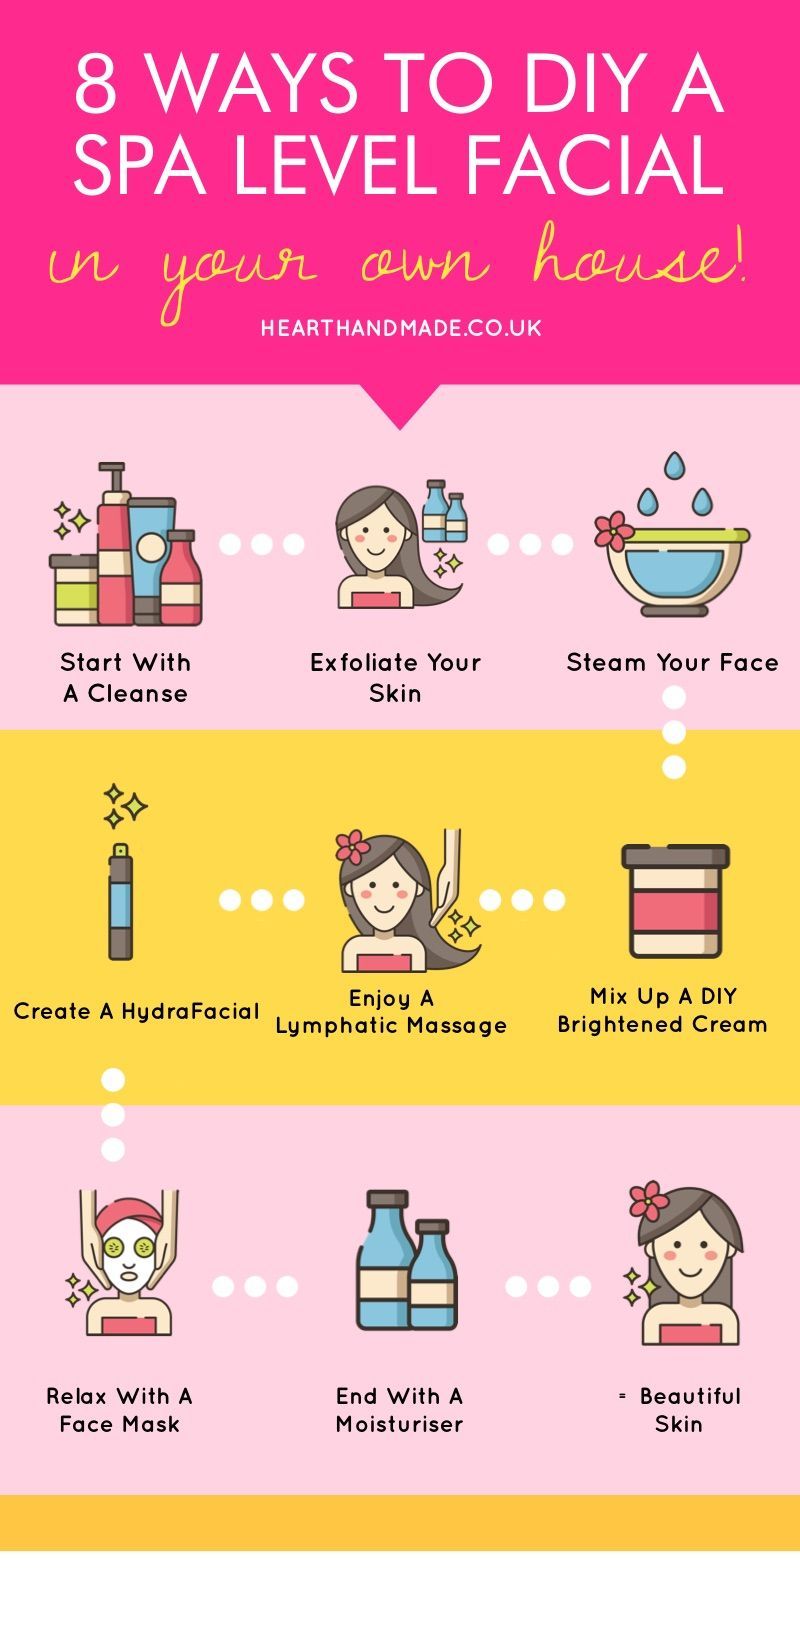 How To Do A Professional Facial At Home, Easily! - How To Do A Professional Facial At Home, Easily! -   17 how to get beauty Skin ideas